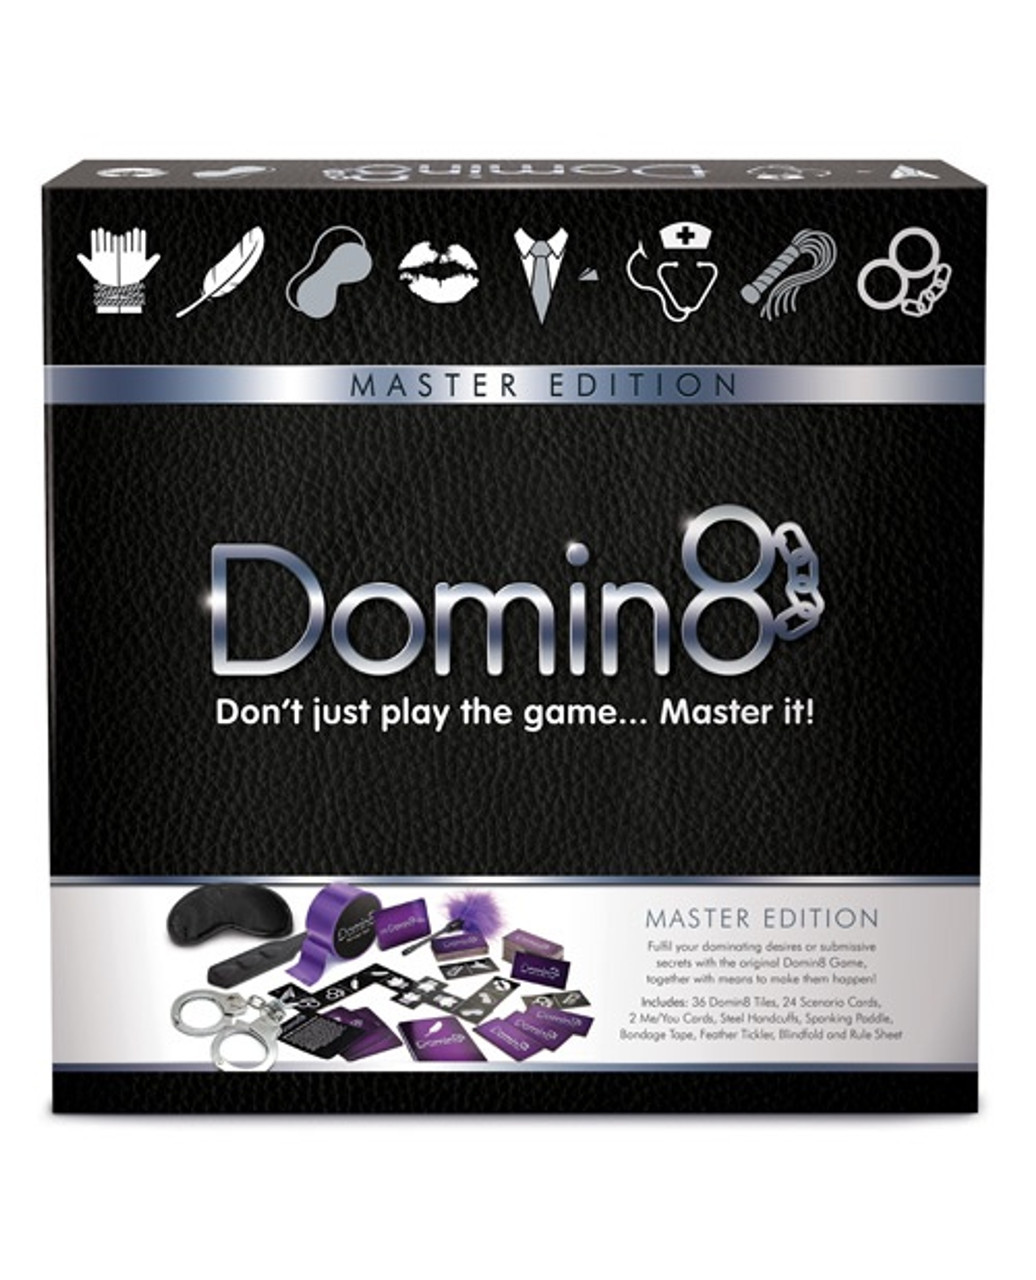 Domin8 Game Master Edition